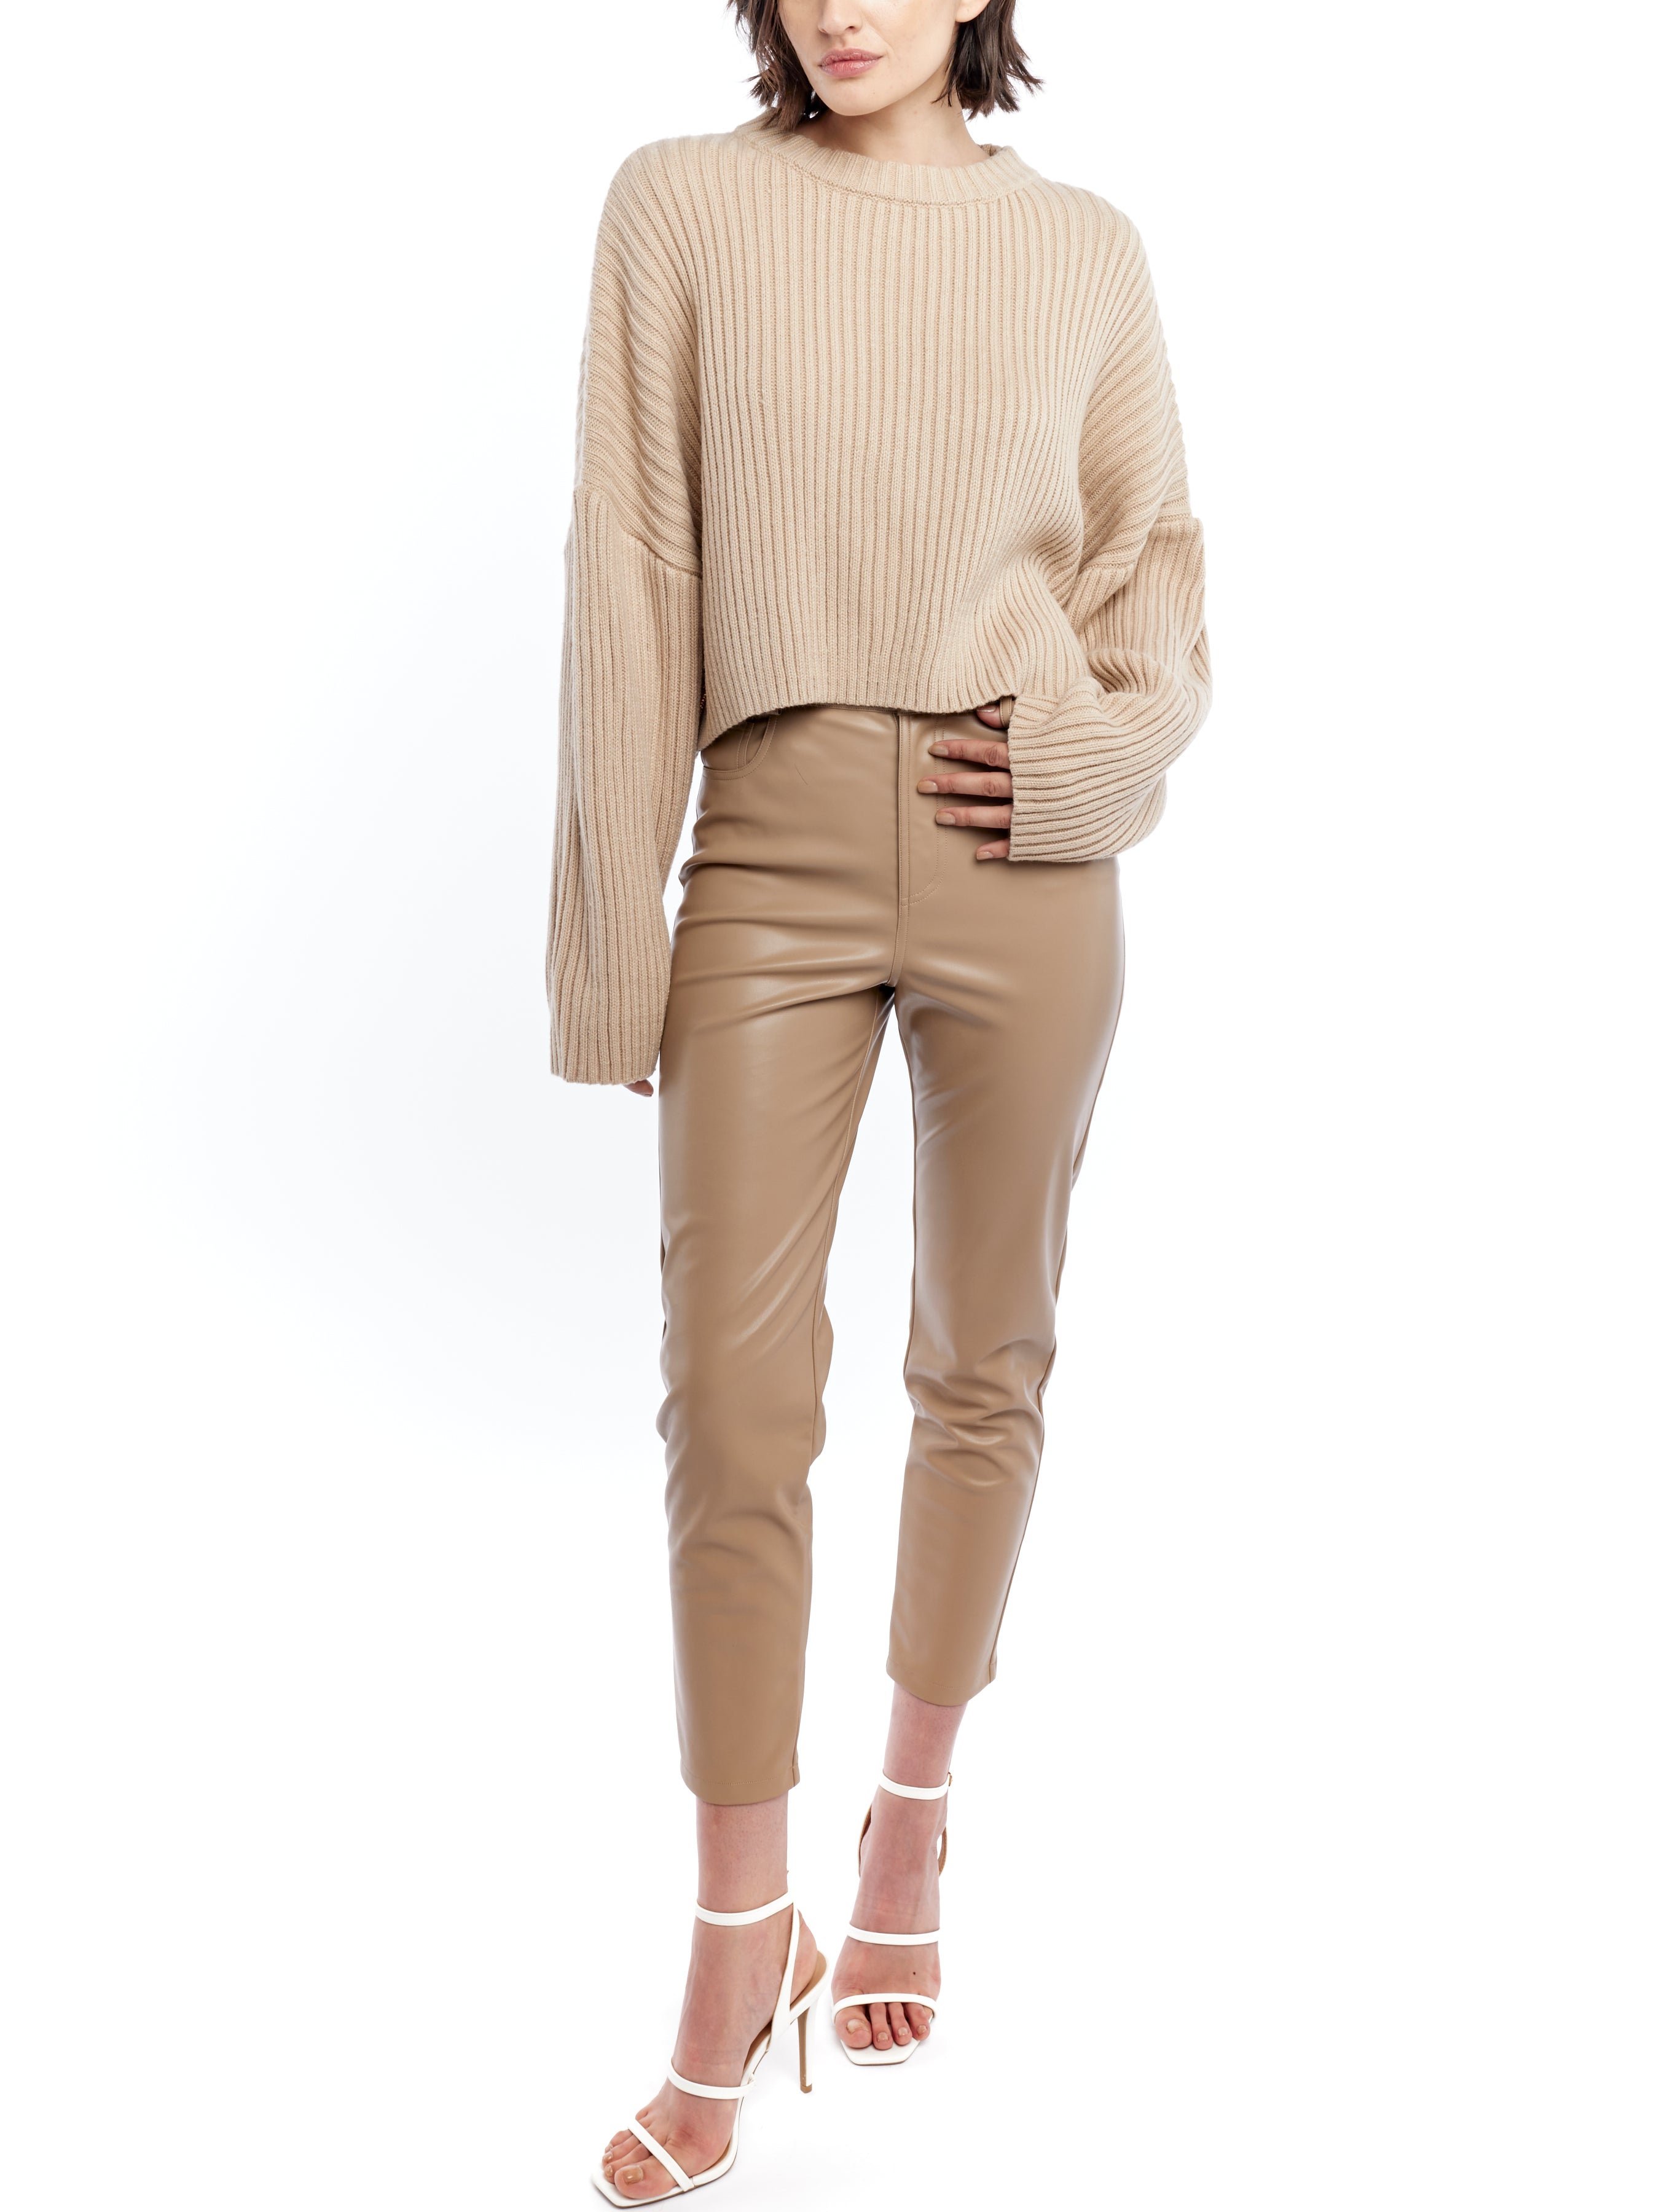 ribbed, thick crew neck sweater with a drop shoulder, relaxed fit and slightly cropped length in oatmeal